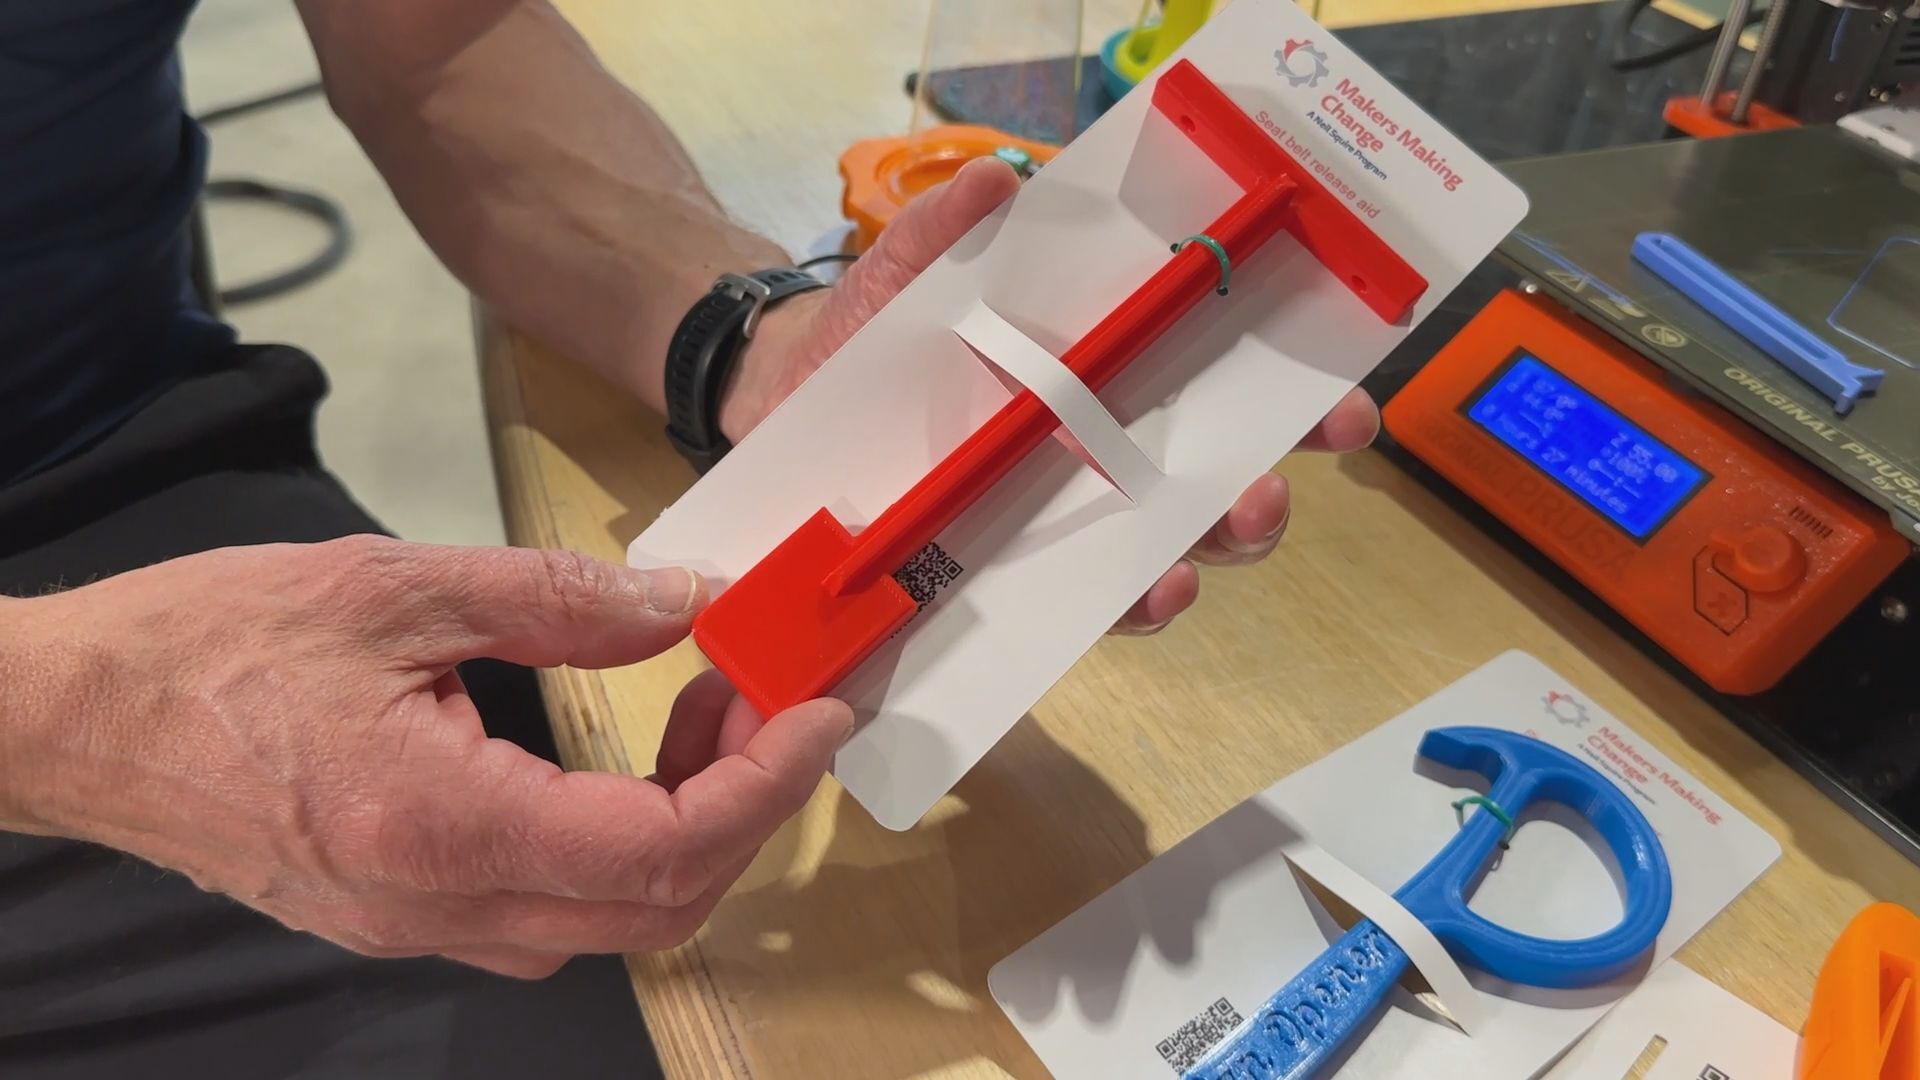 Canadians using 3D printing to remove accessibility barriers at low cost